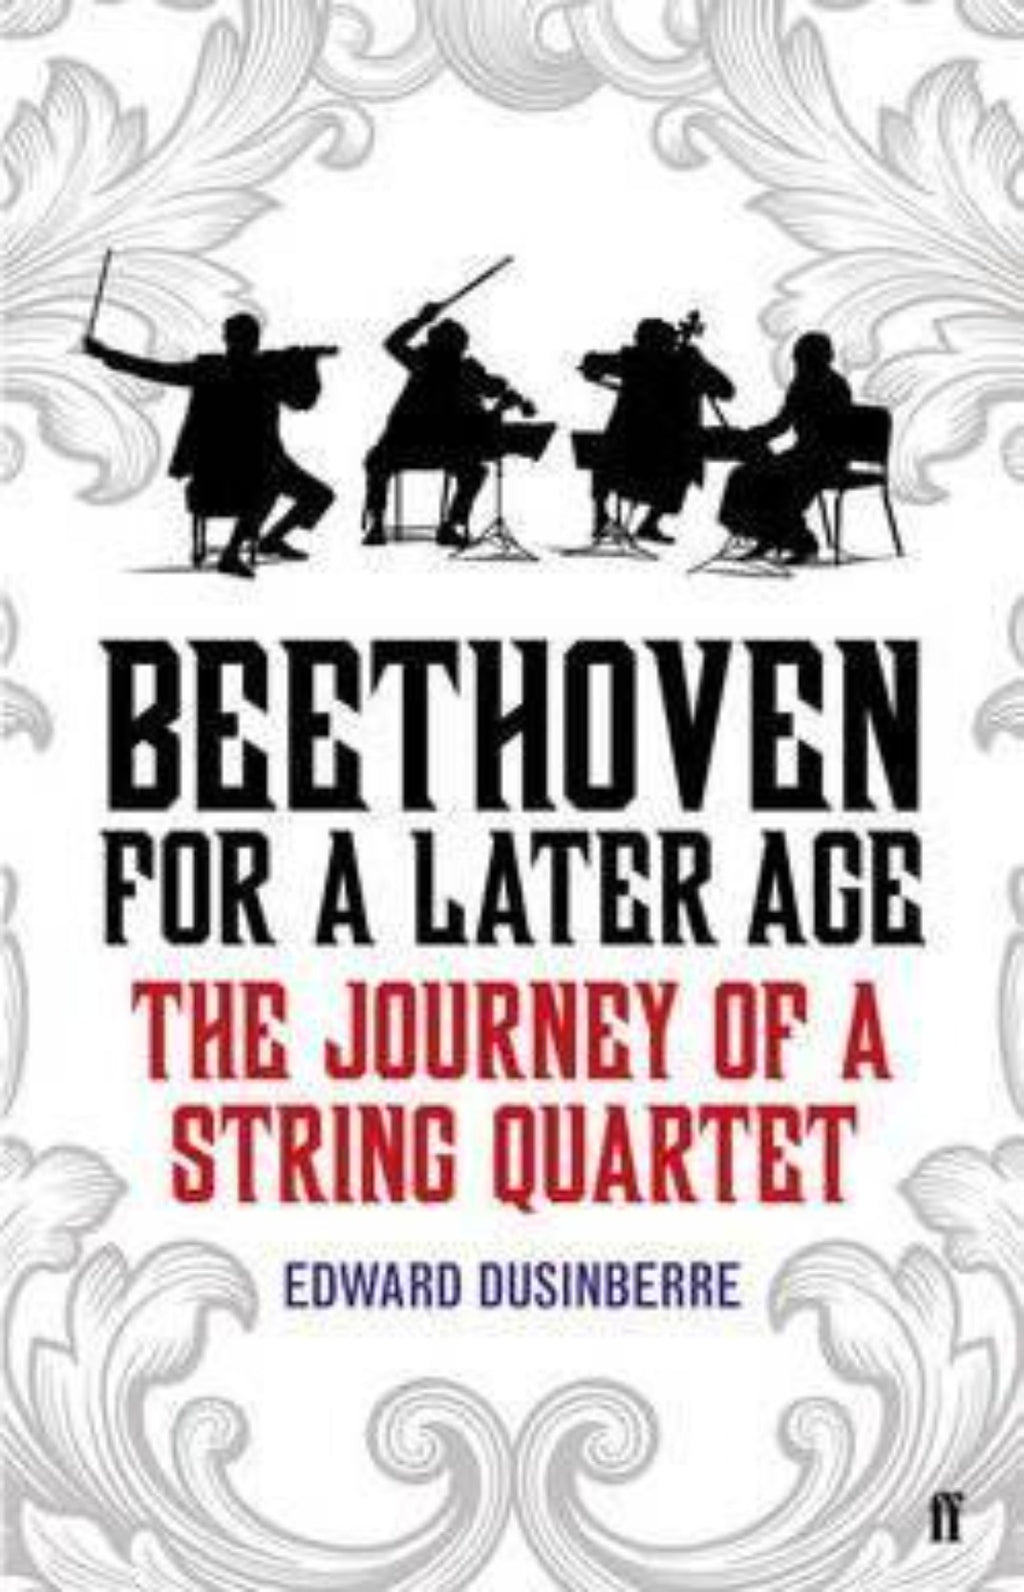 Beethoven for a Later Age : The Journey of a String Quartet